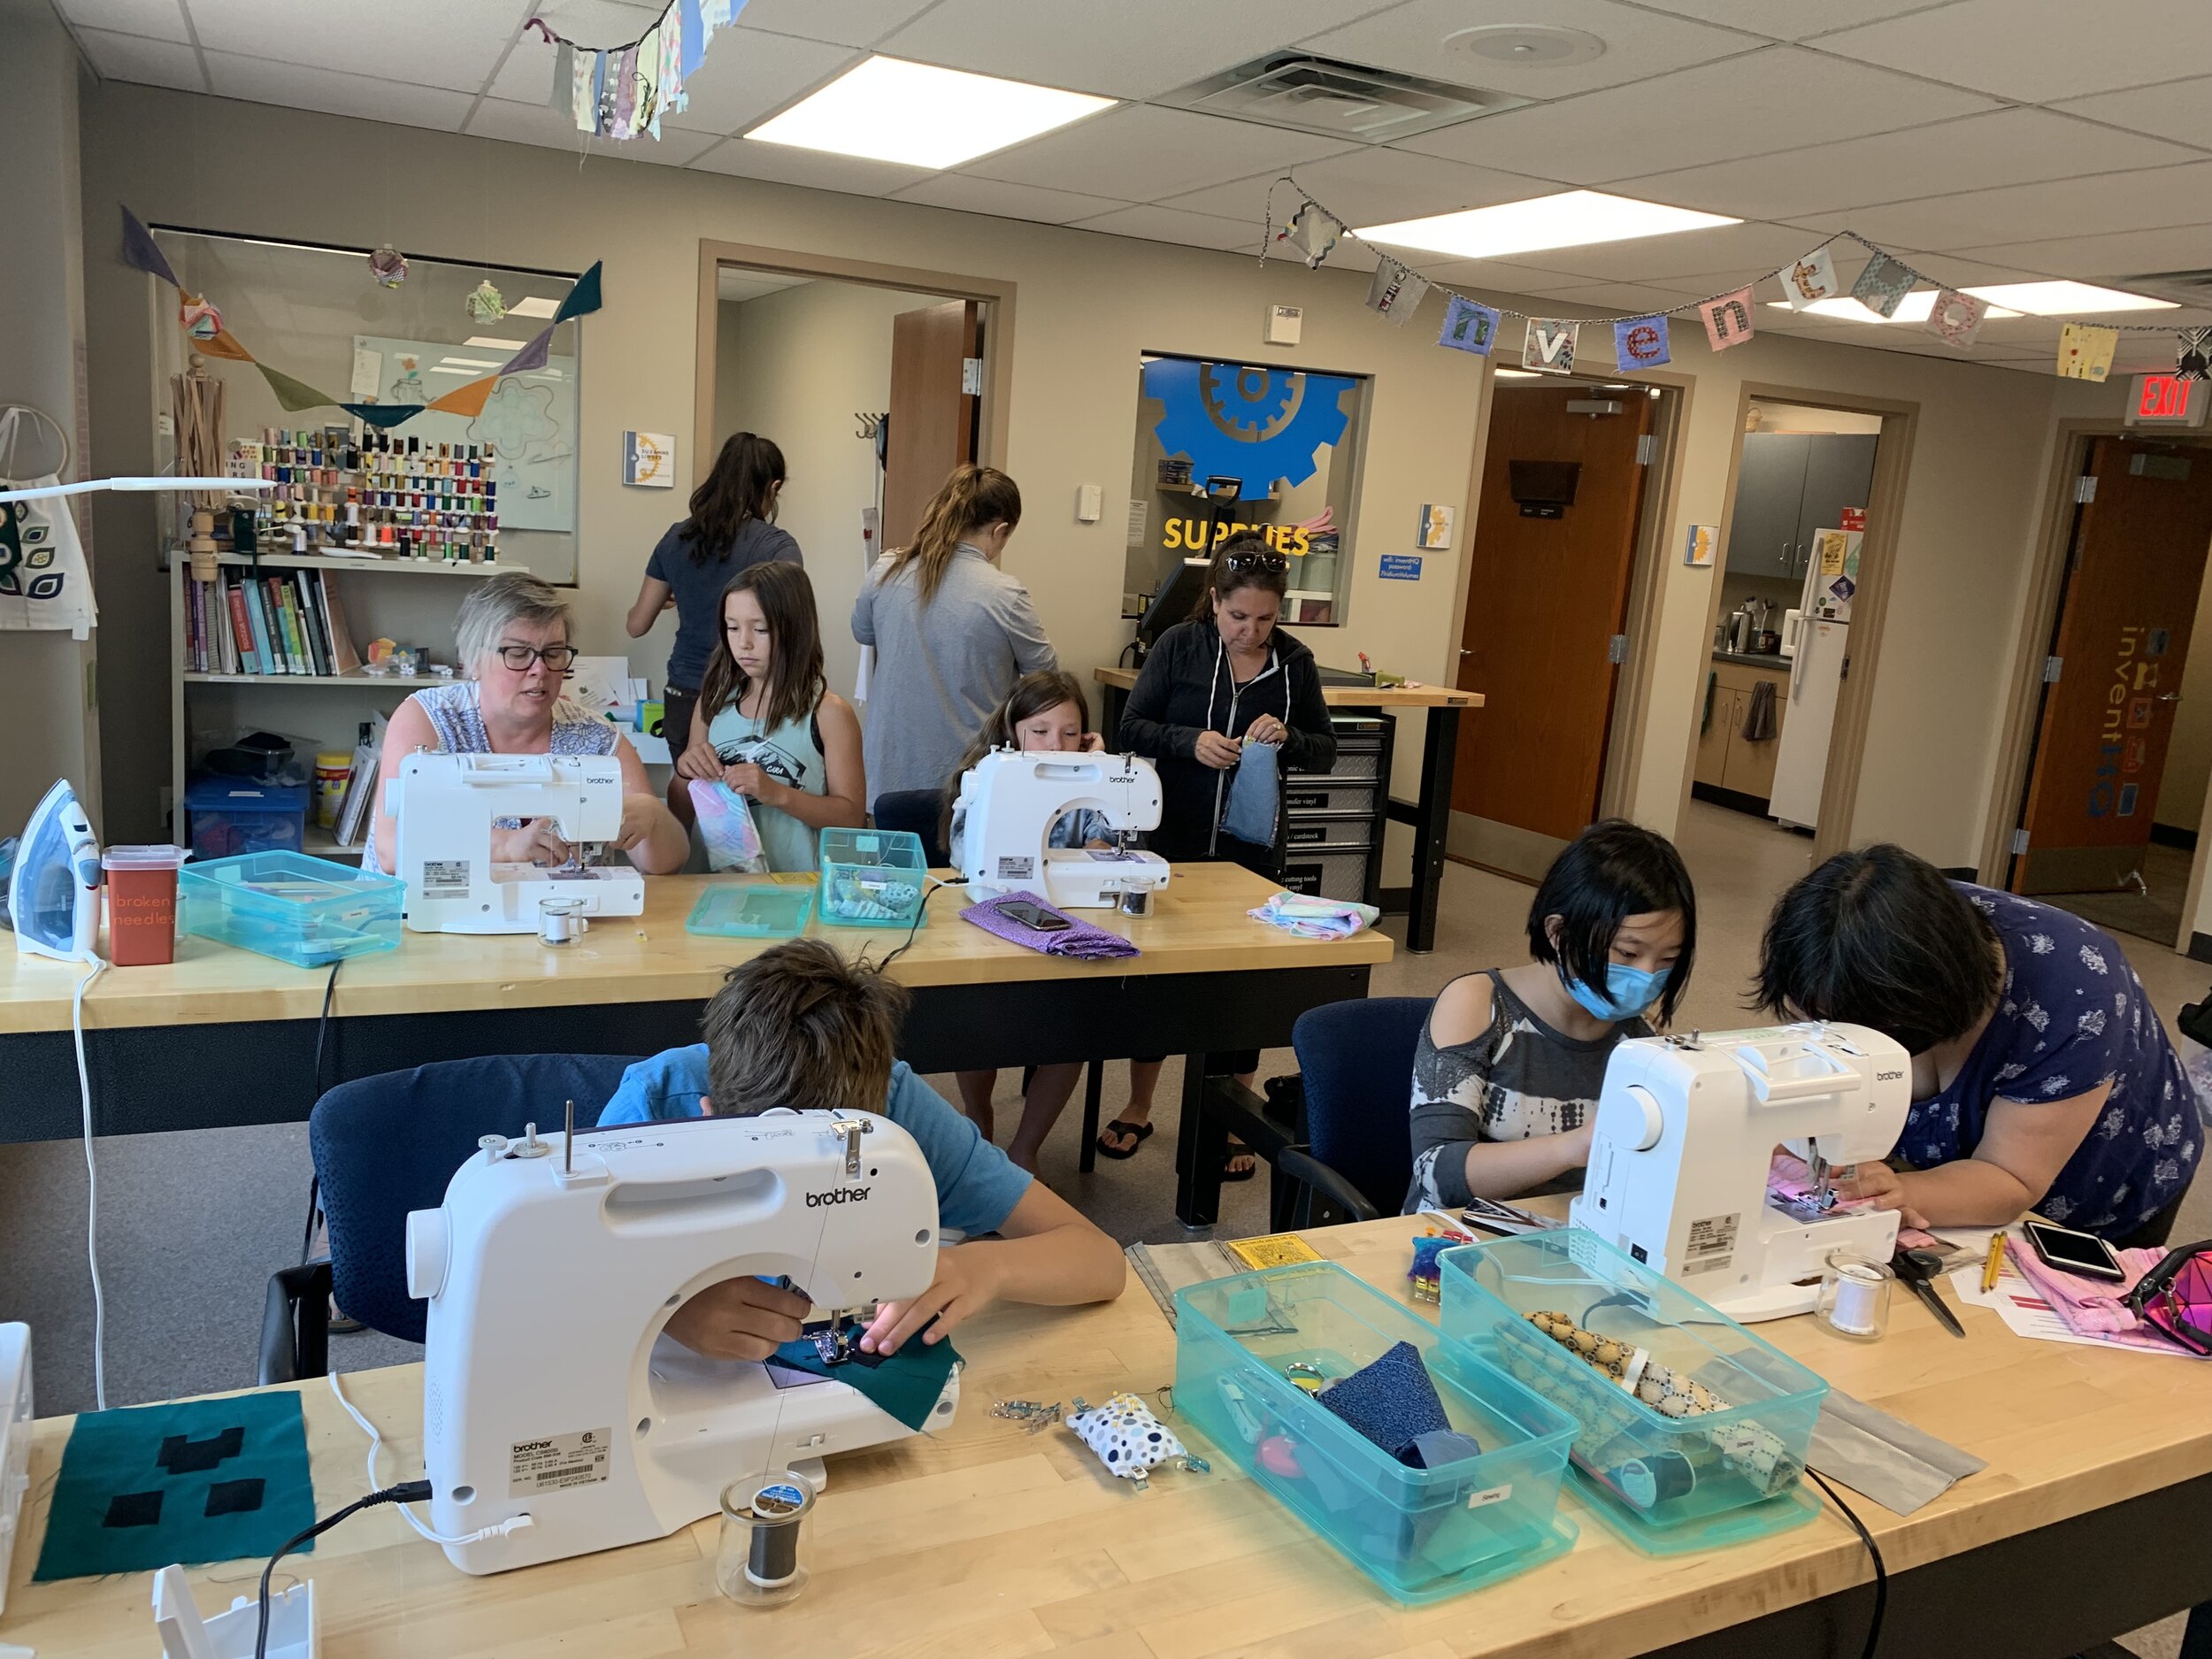 Sewing Station, Makerspace